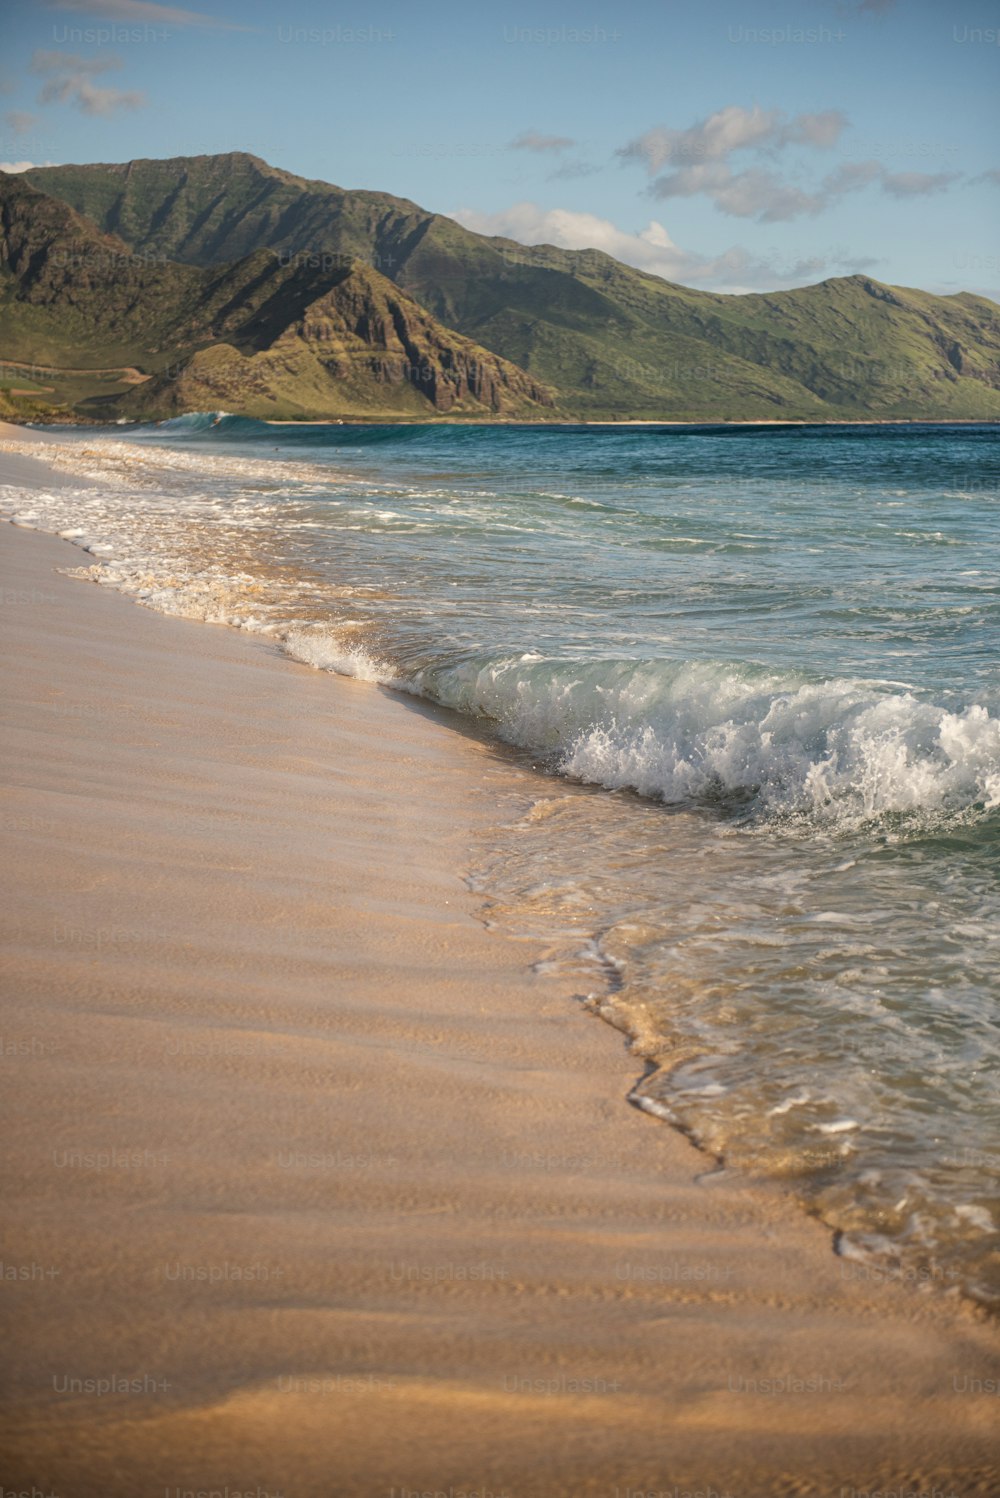 a beach with waves and mountains in the background